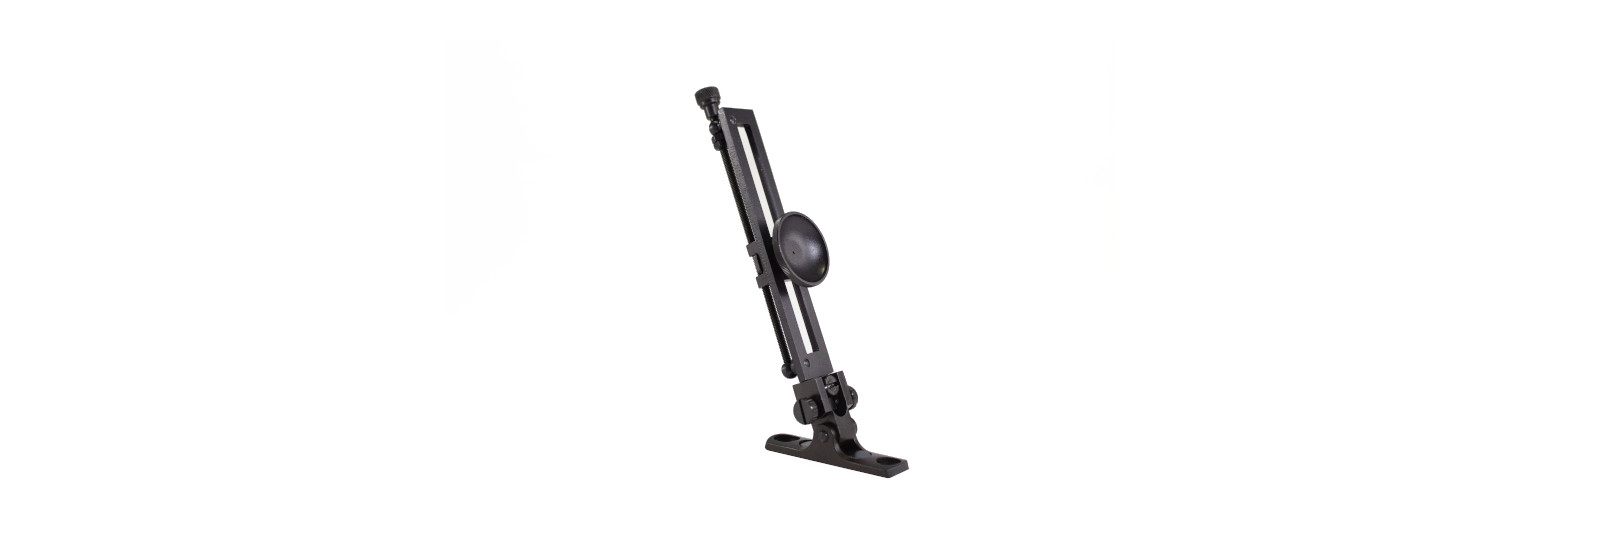 Long Creedmoor sight adjustable for windage and...